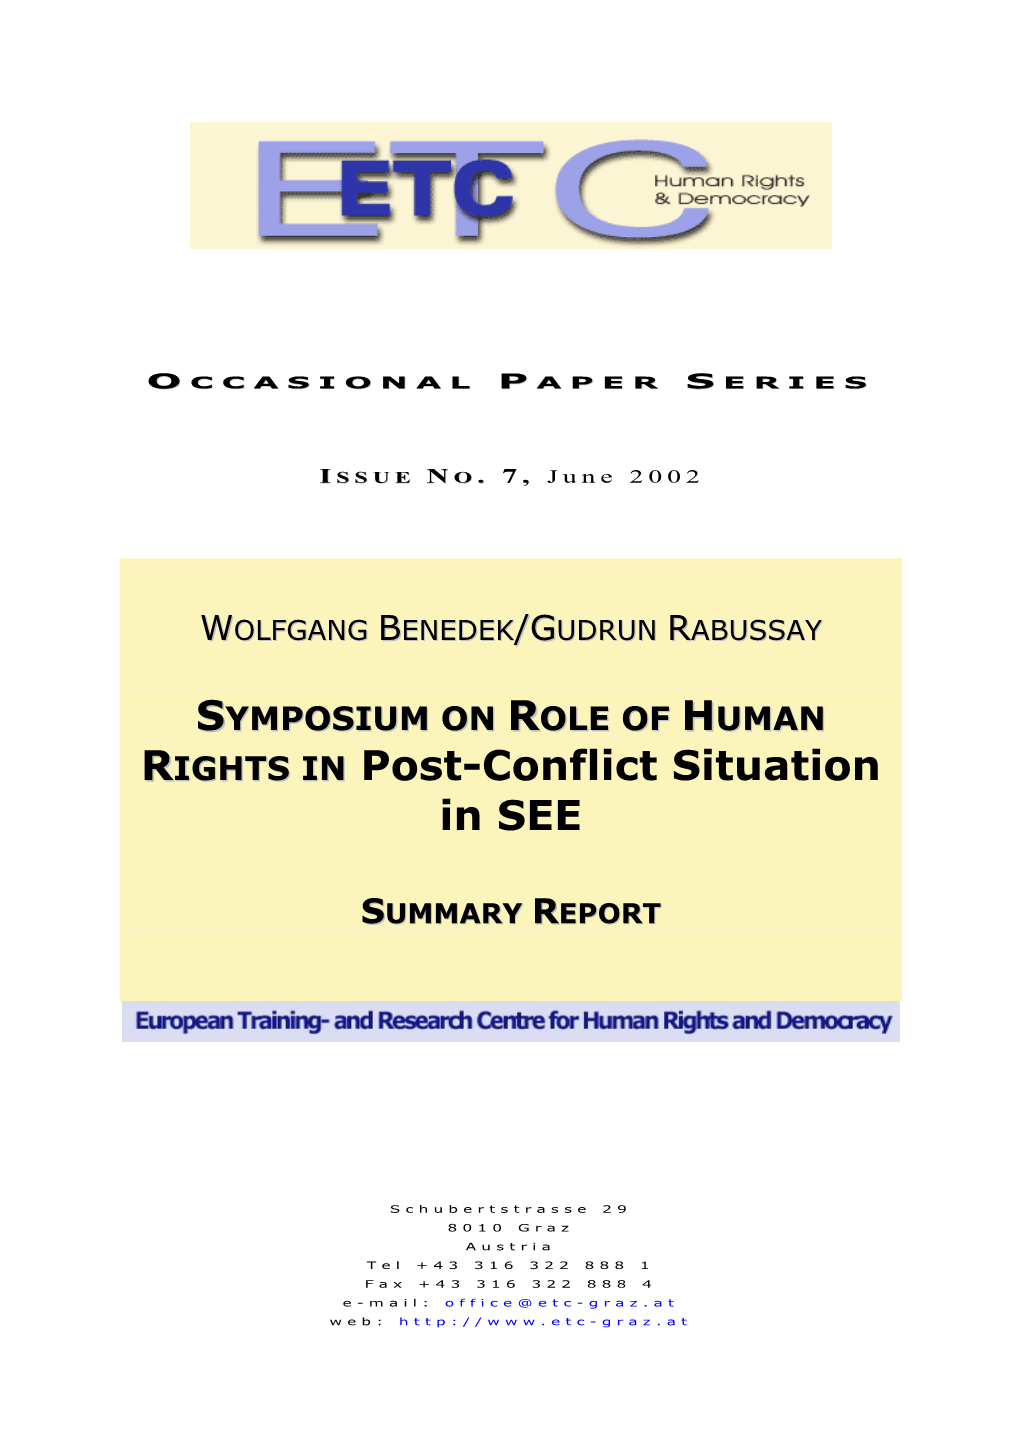 Symposium on Role of Human Rights in Post-Conflict Situation in SEE